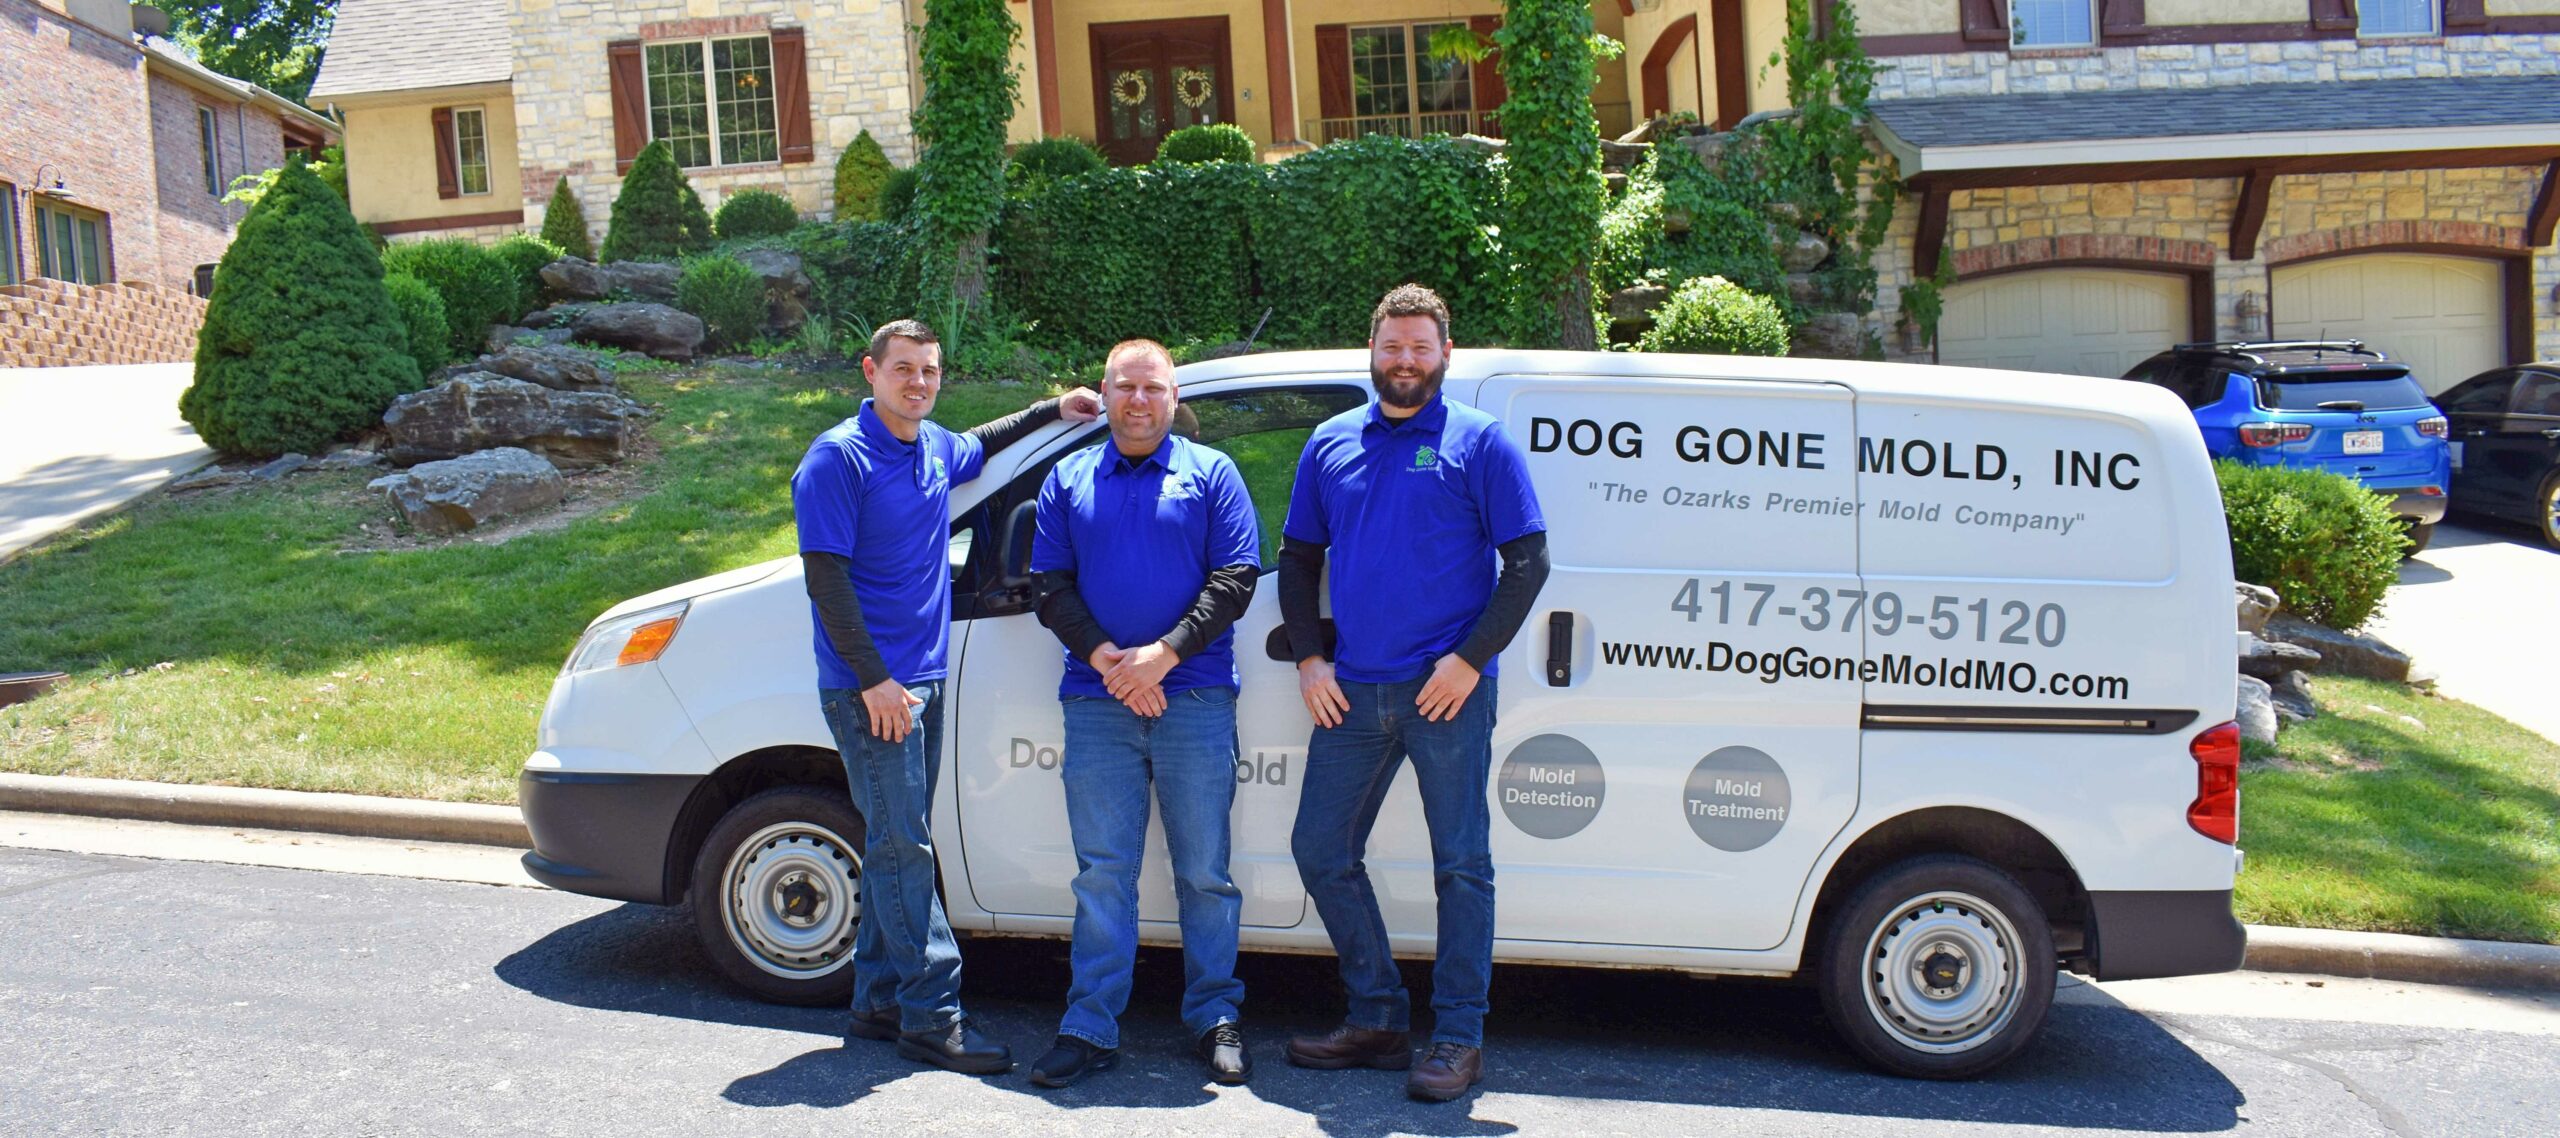 Meet The Team For Mold Removal In Springfield Missouri